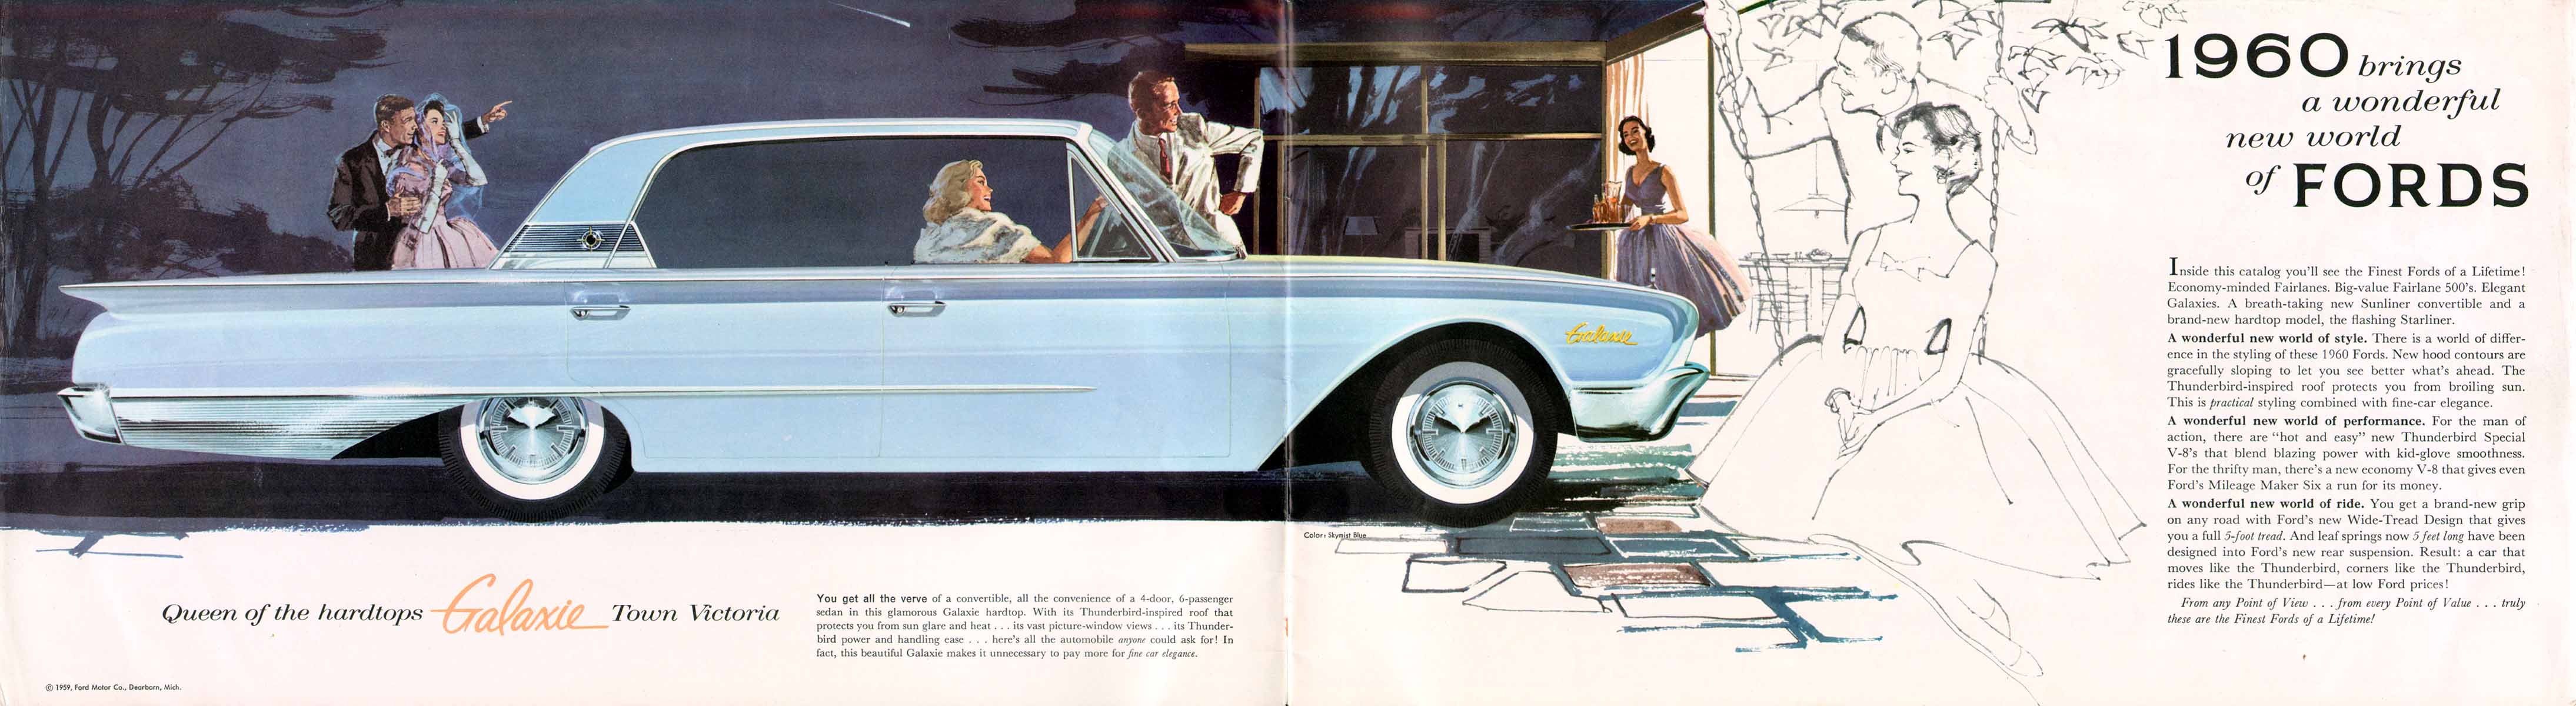 1960_Ford-02-03